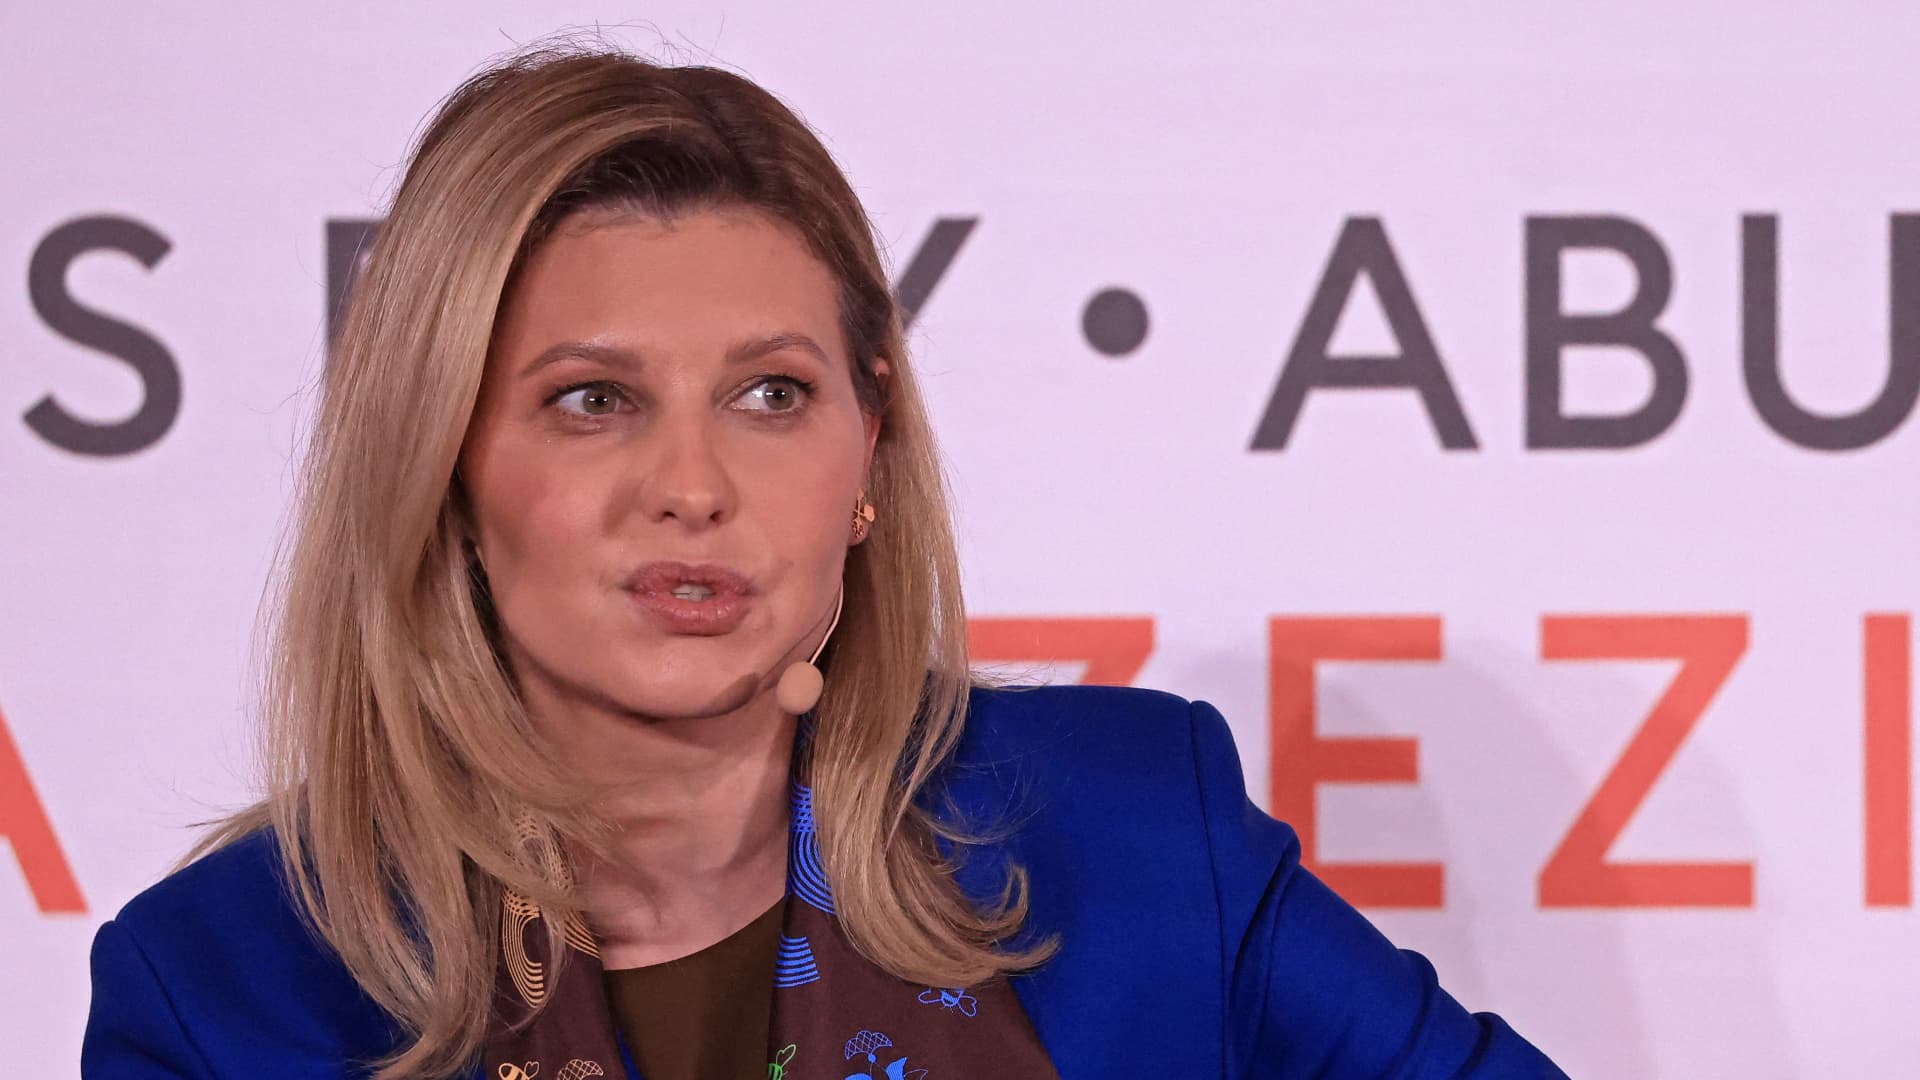 Ukraine's First Lady Olena Zelenska attends the Forbes 30/50 Summit in Abu Dhabi on March 8 2023 in celebration of International Womens Day.